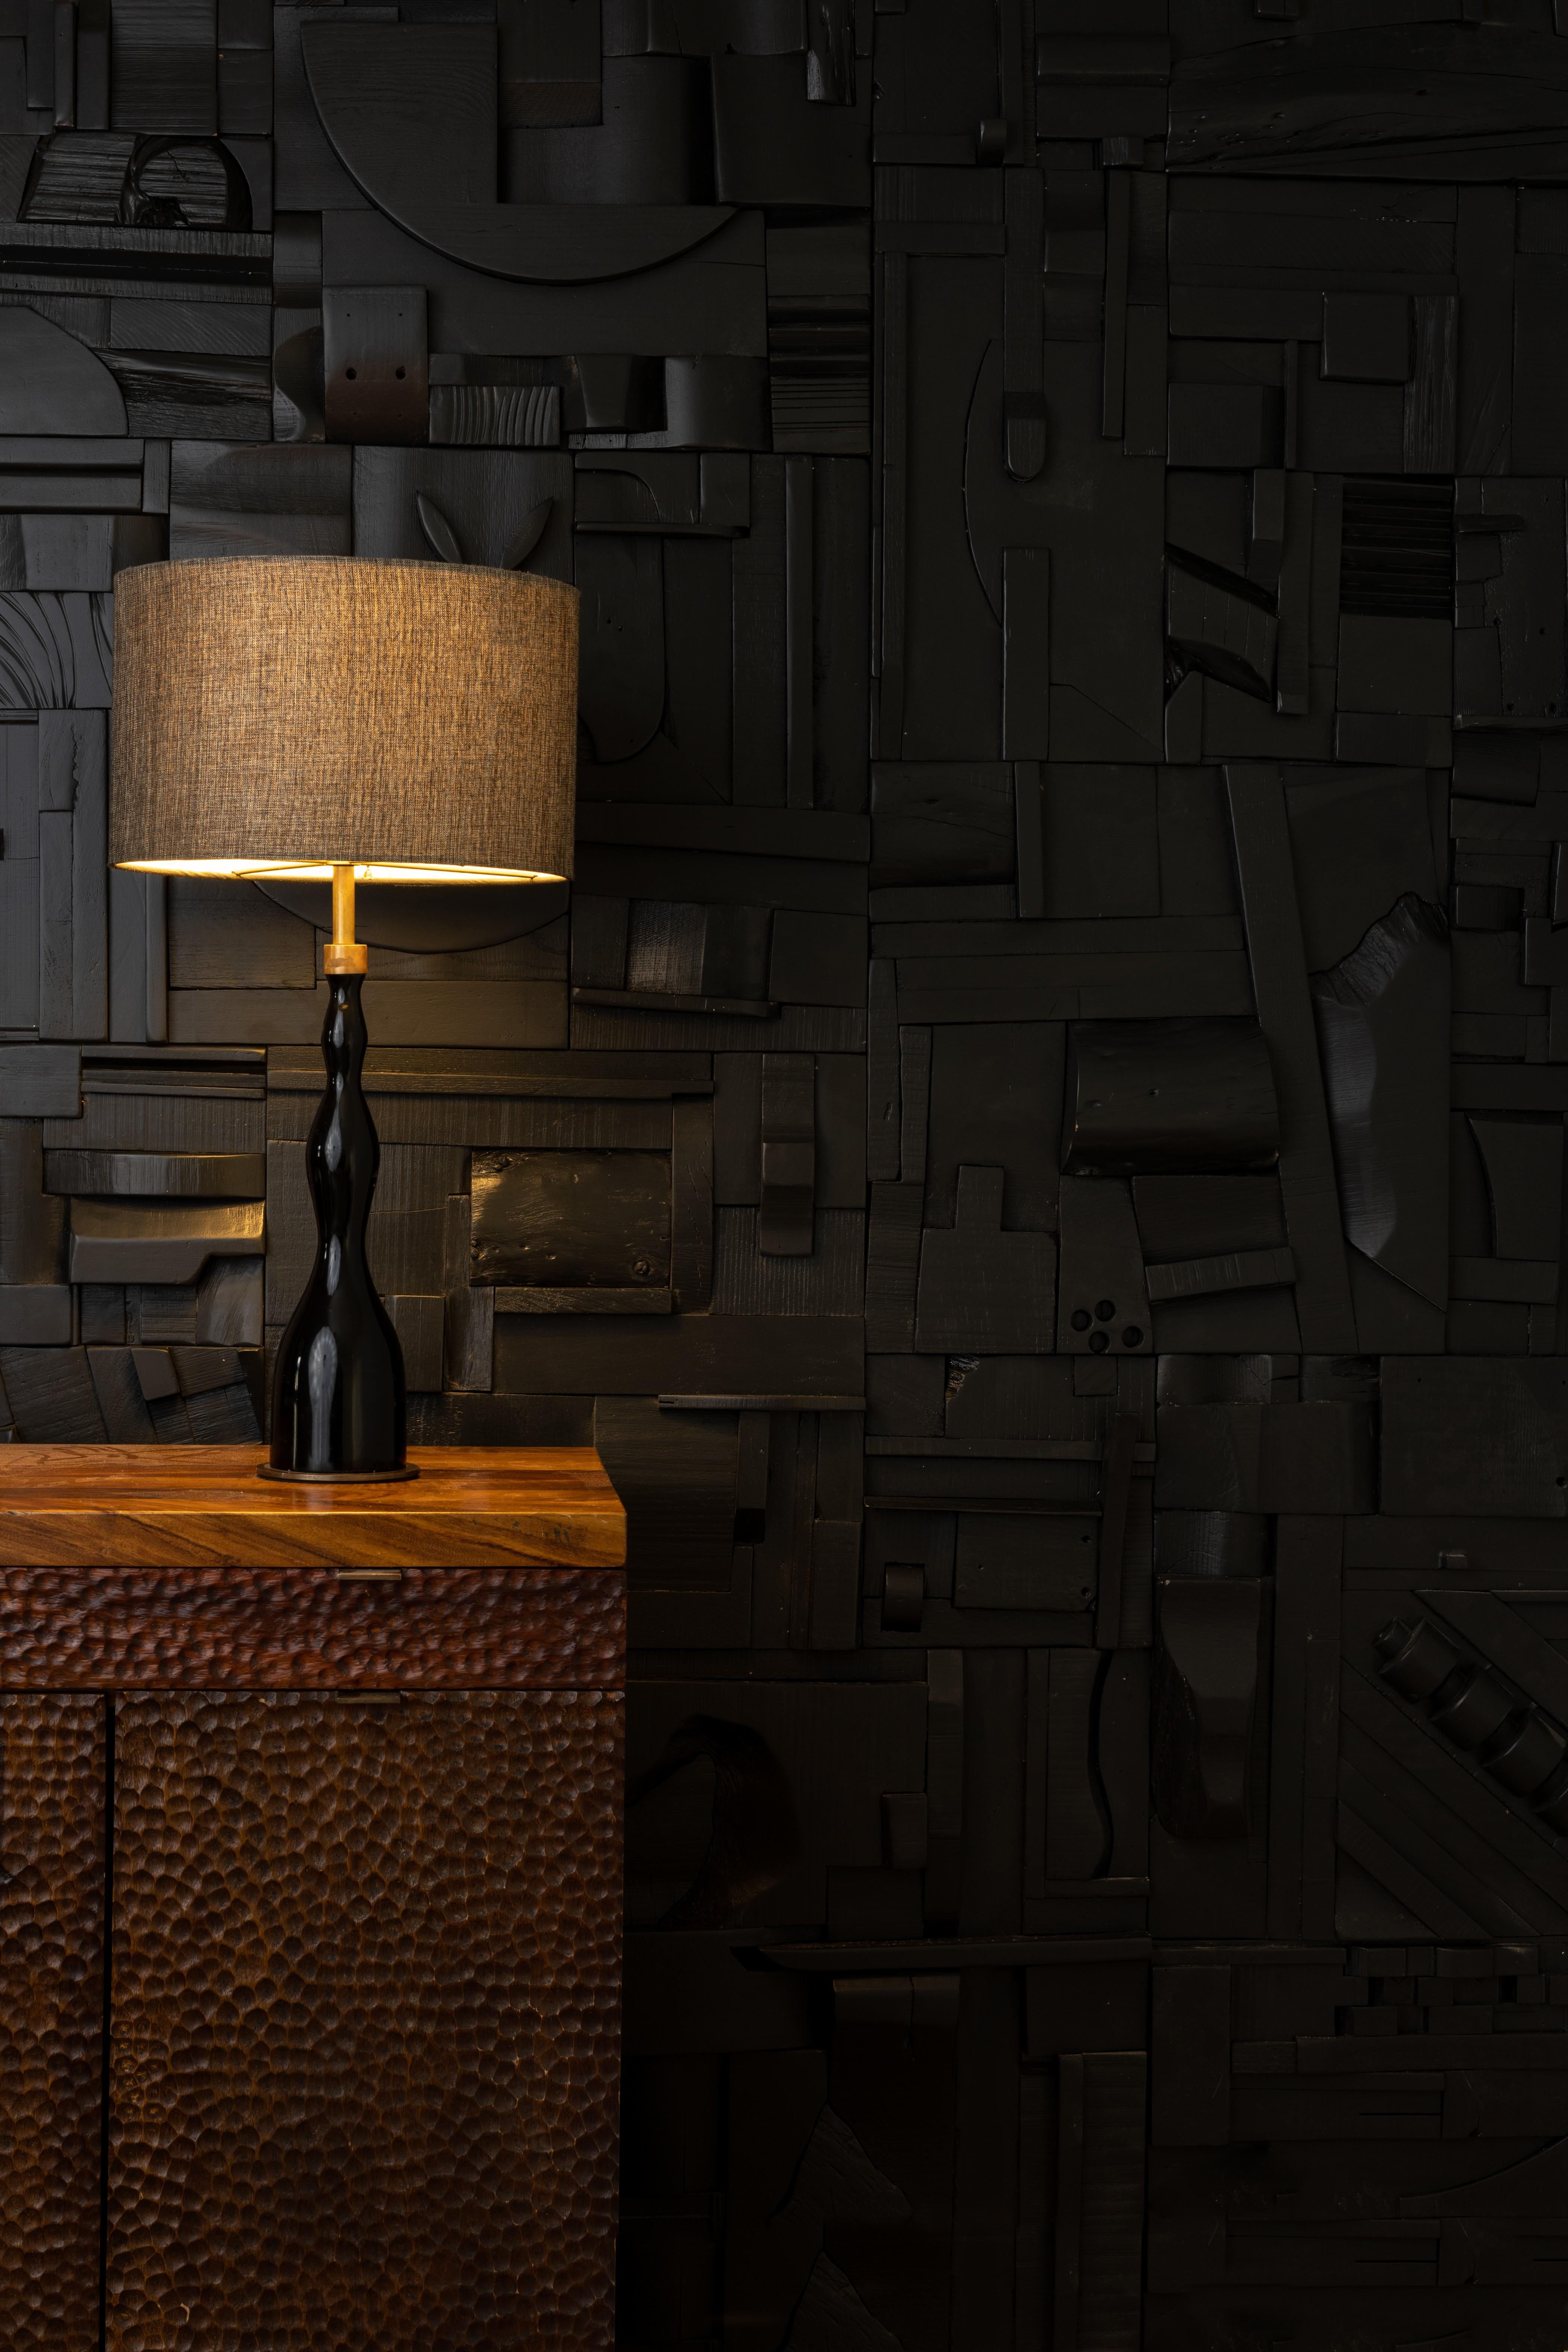 These MATTE BLACK collage tiles are composed randomly from recycled wood remnants and when installed bathe any space with a warm feeling and texture which is meditative, sanded to a soft finish, and protected with lacquer and wax. The works convey